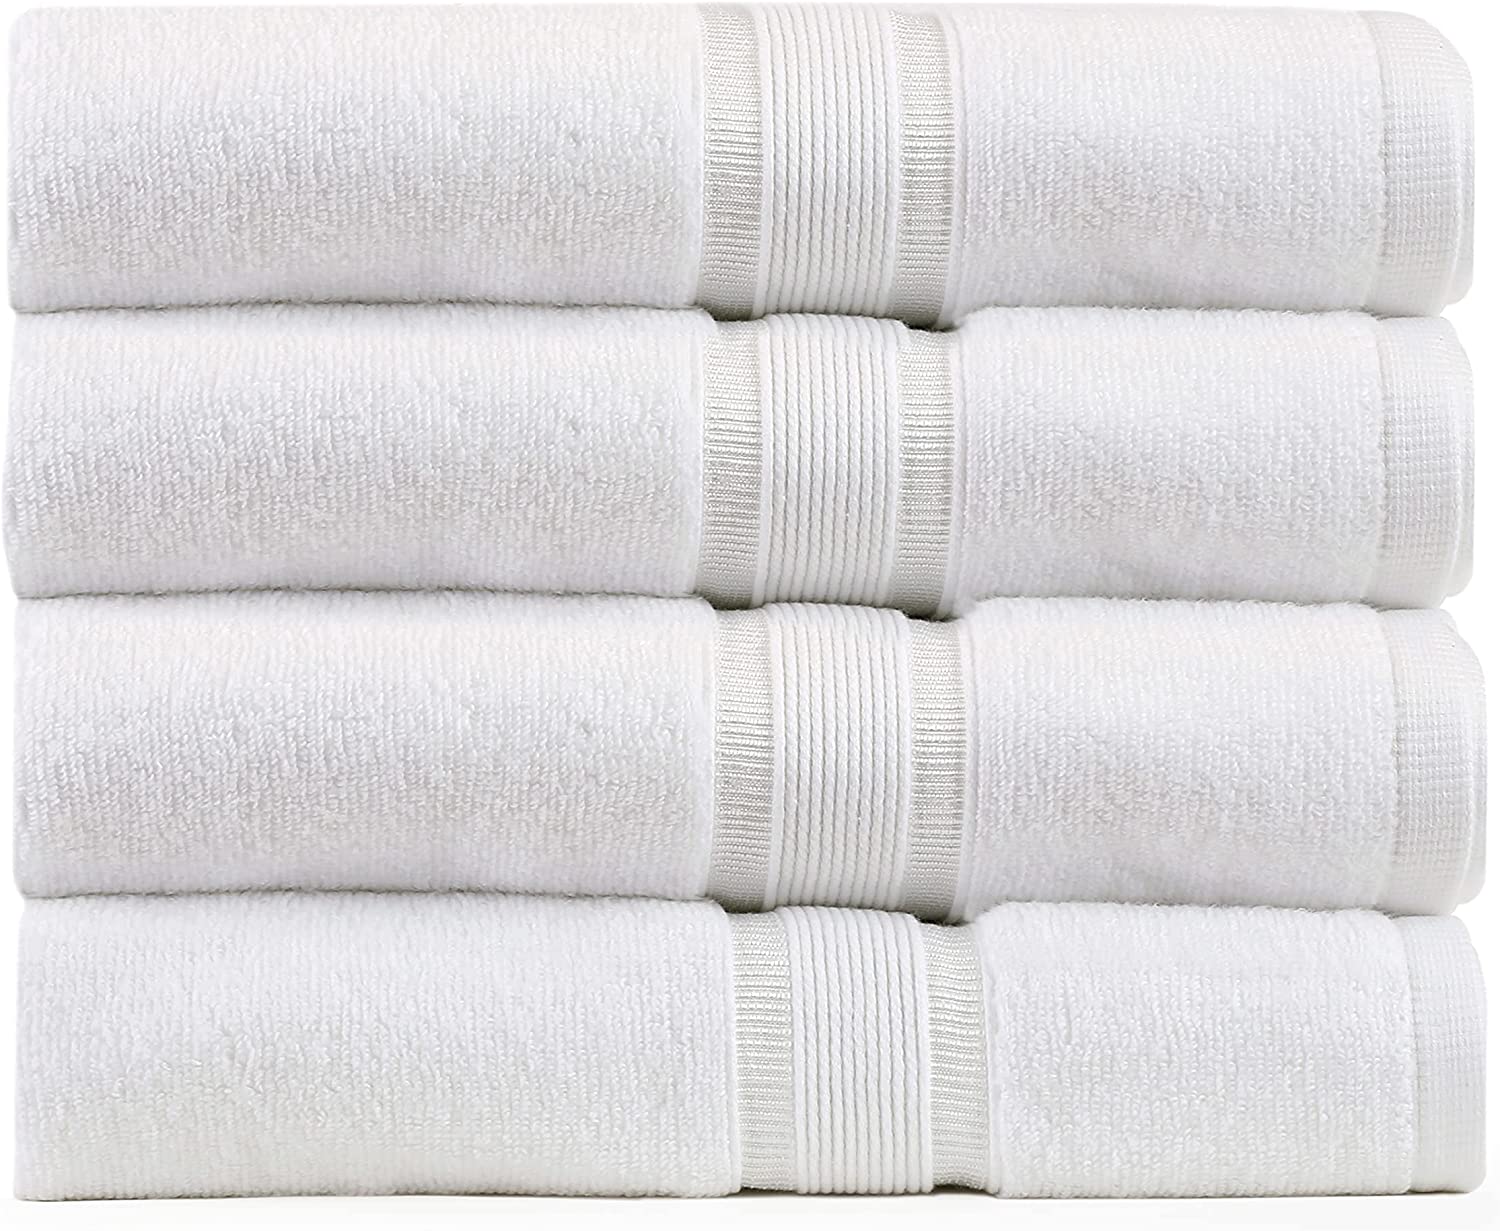 White Bath Towels–75 x 145cm Soft and Absorbent, Premium Quality Perfect for Daily Use 100% ZERO Twist Cotton Towel